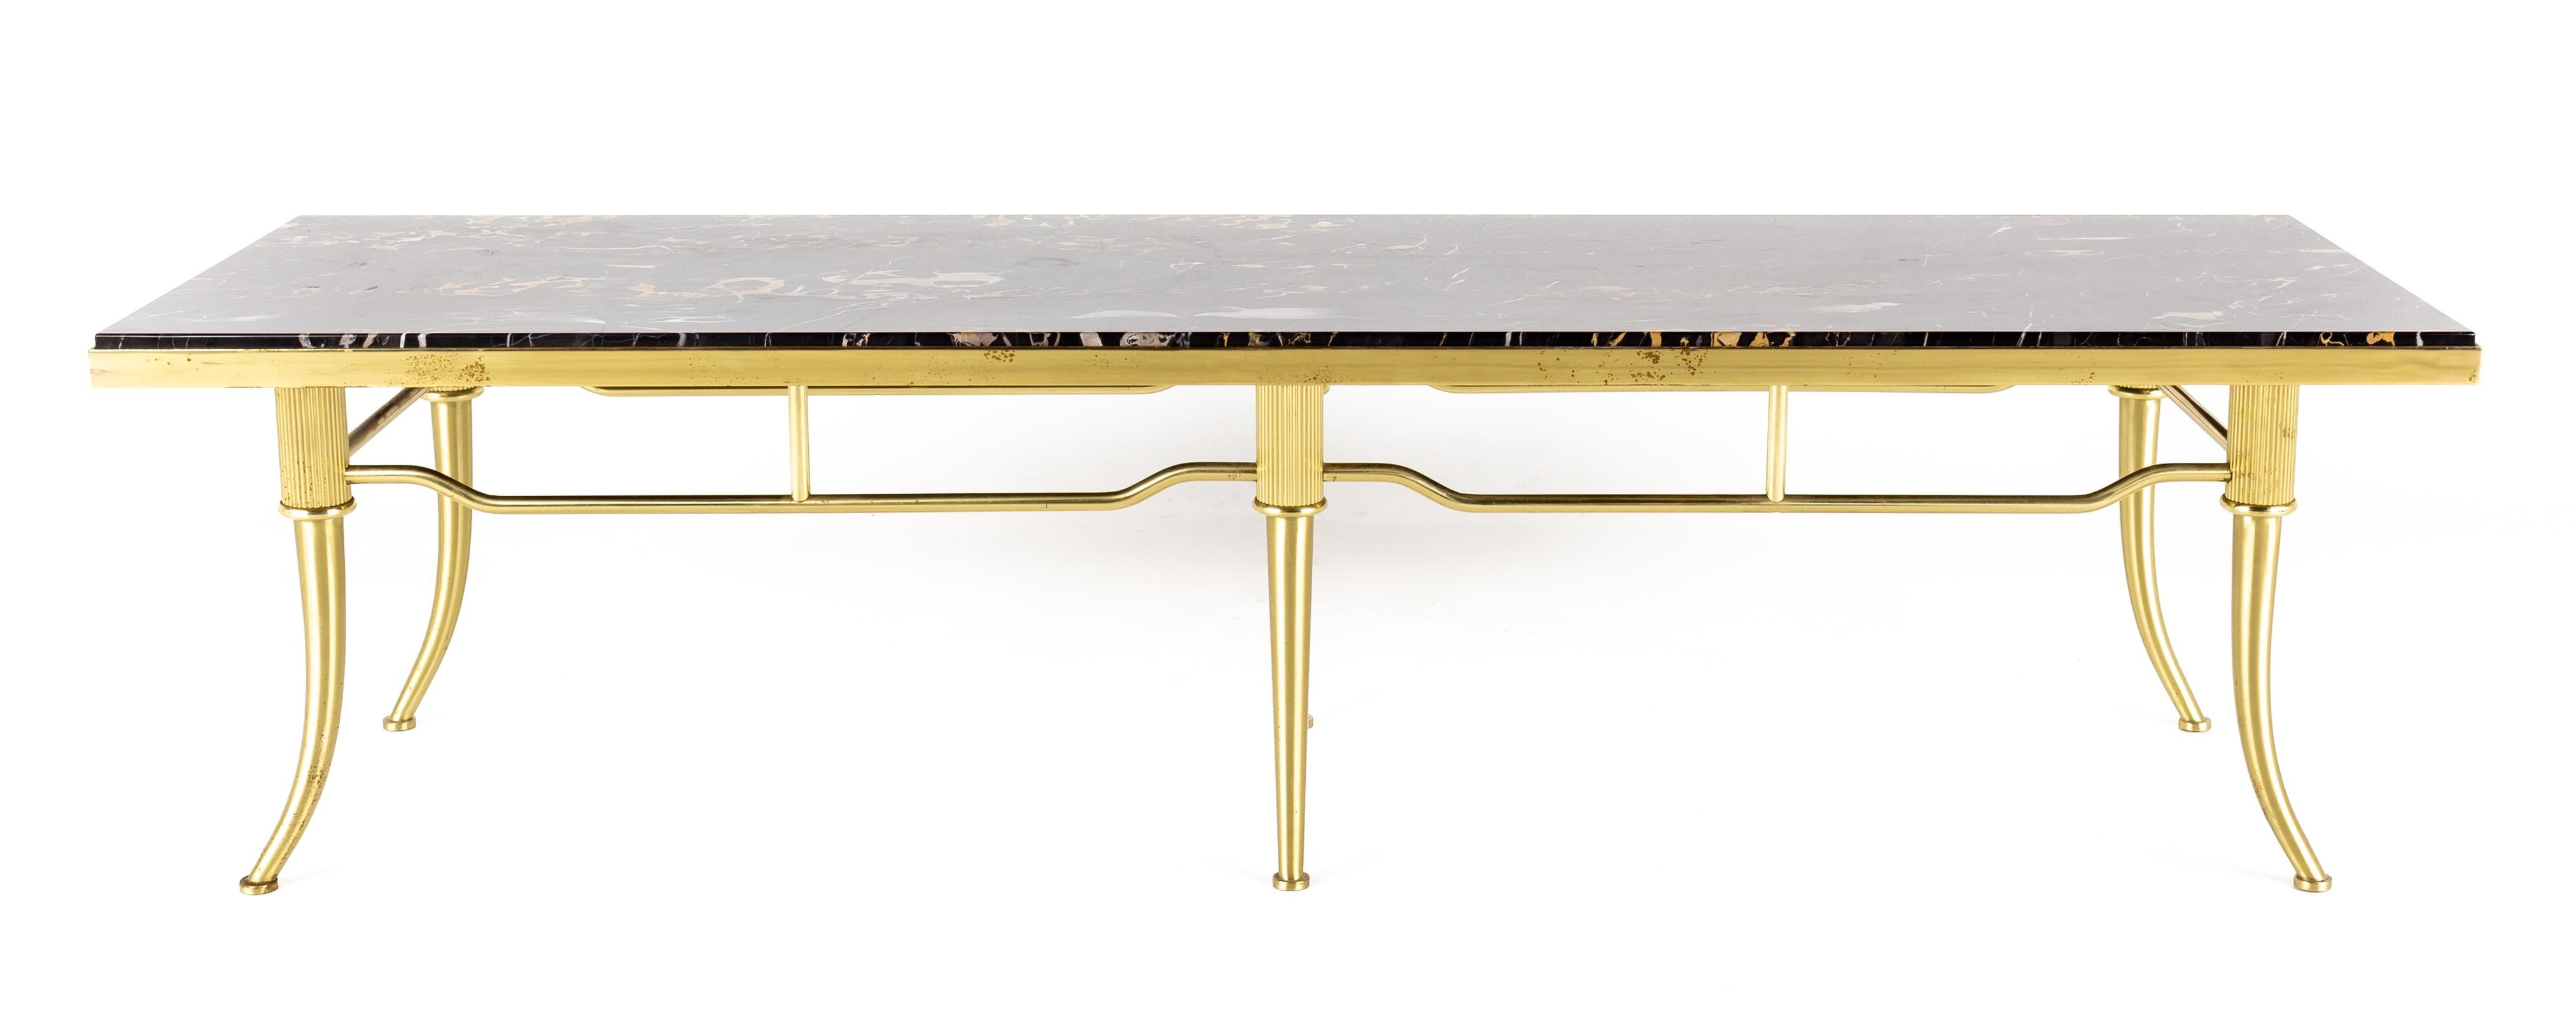 Brass and black marble coffee table

This table measures: 60 wide x 18 deep x 16 inches high

This table is in Great Vintage Condition with minor marks, dents, and wear.

About Photos: We take our photos in a controlled lighting studio to show as